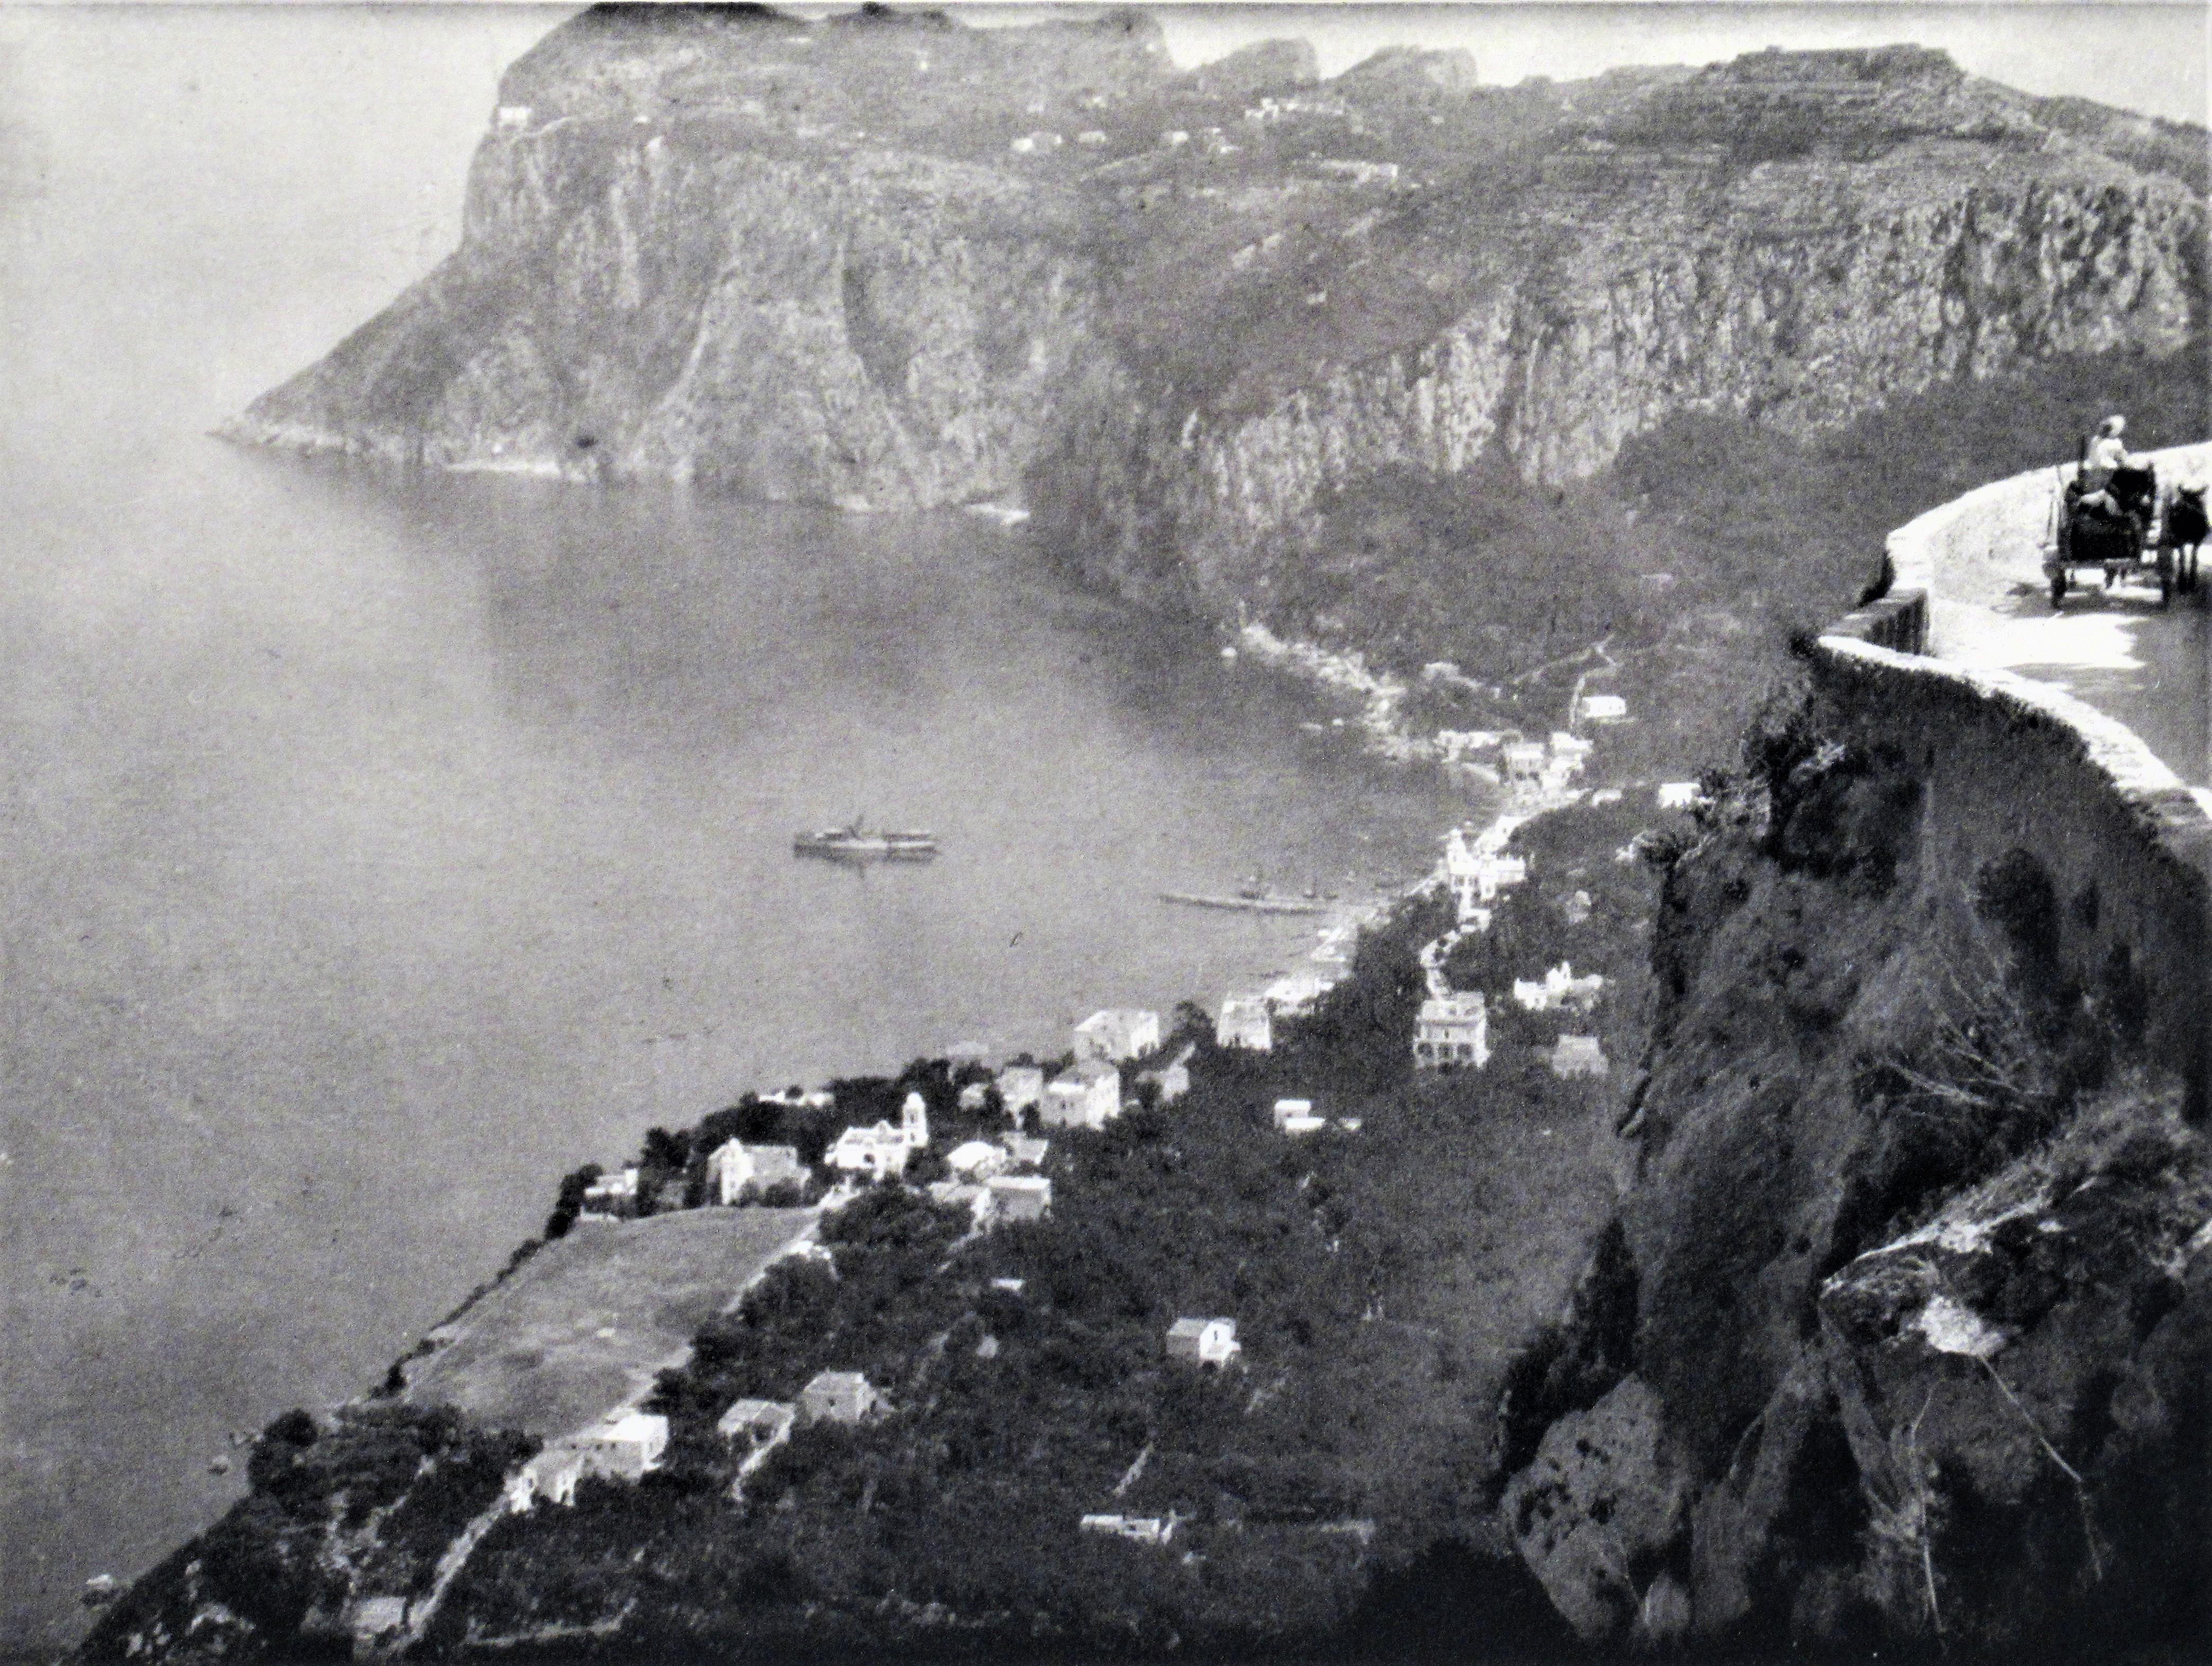 The Cliffs, Sorrento - Photograph by Karl Struss